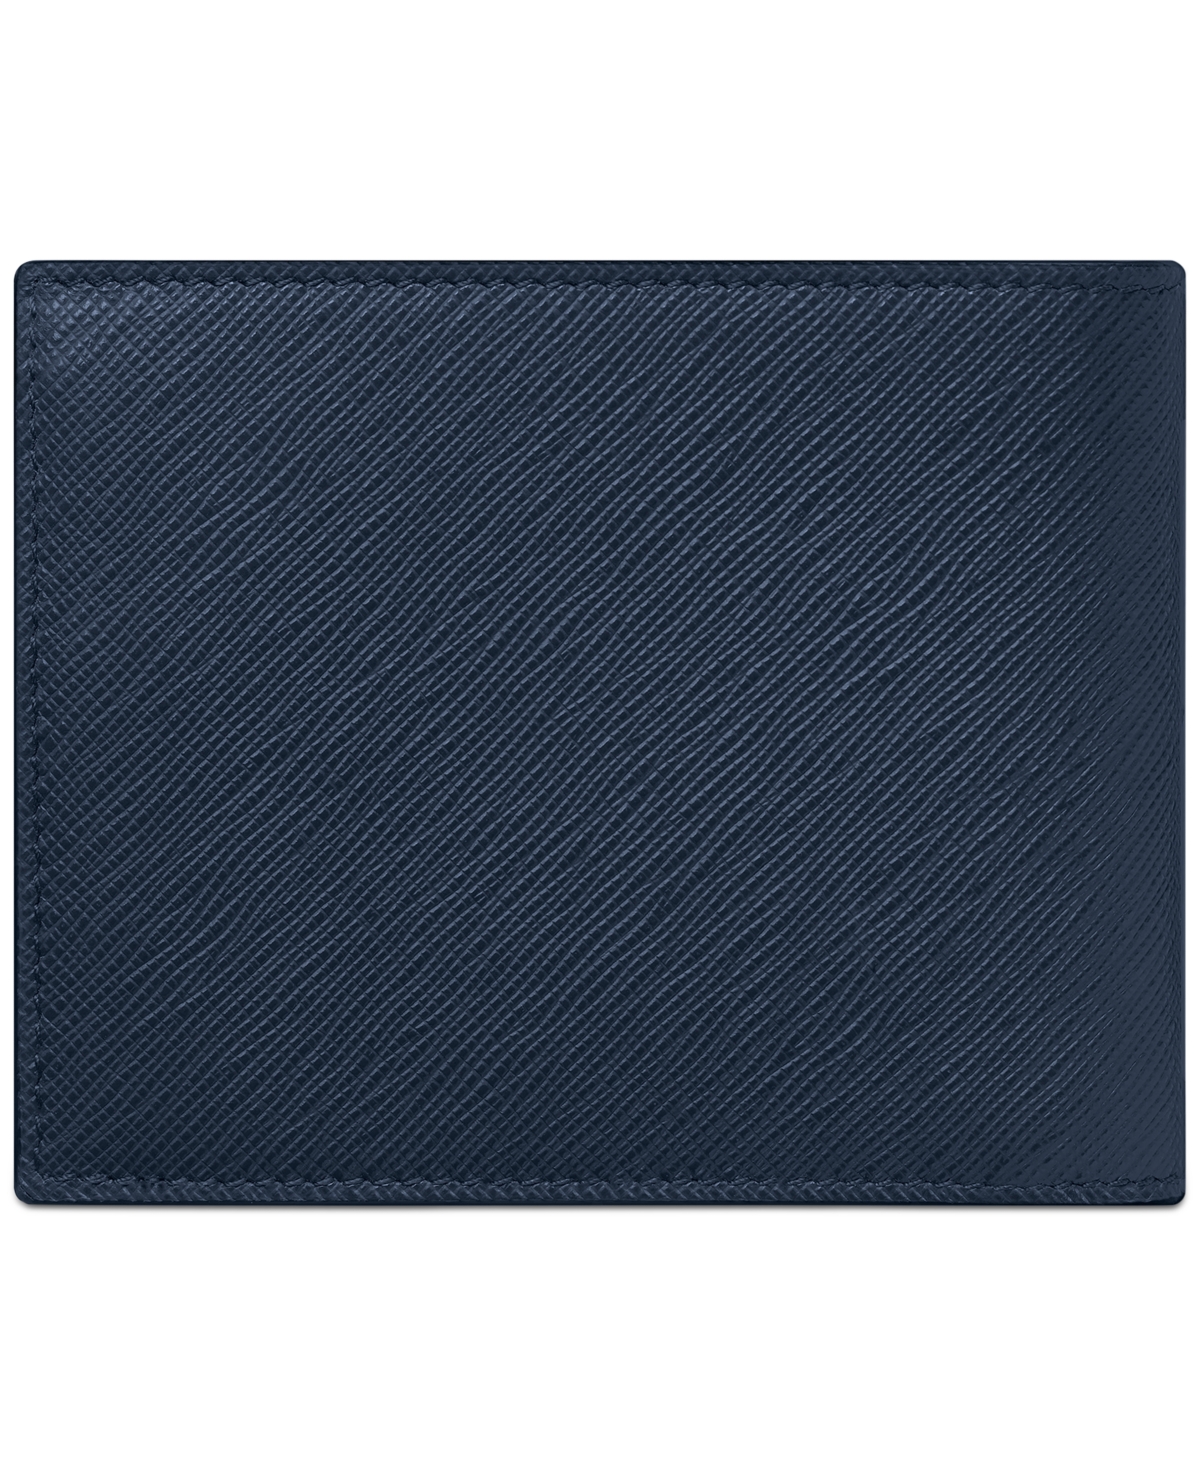 Montblanc Sartorial Leather Wallet In Blue